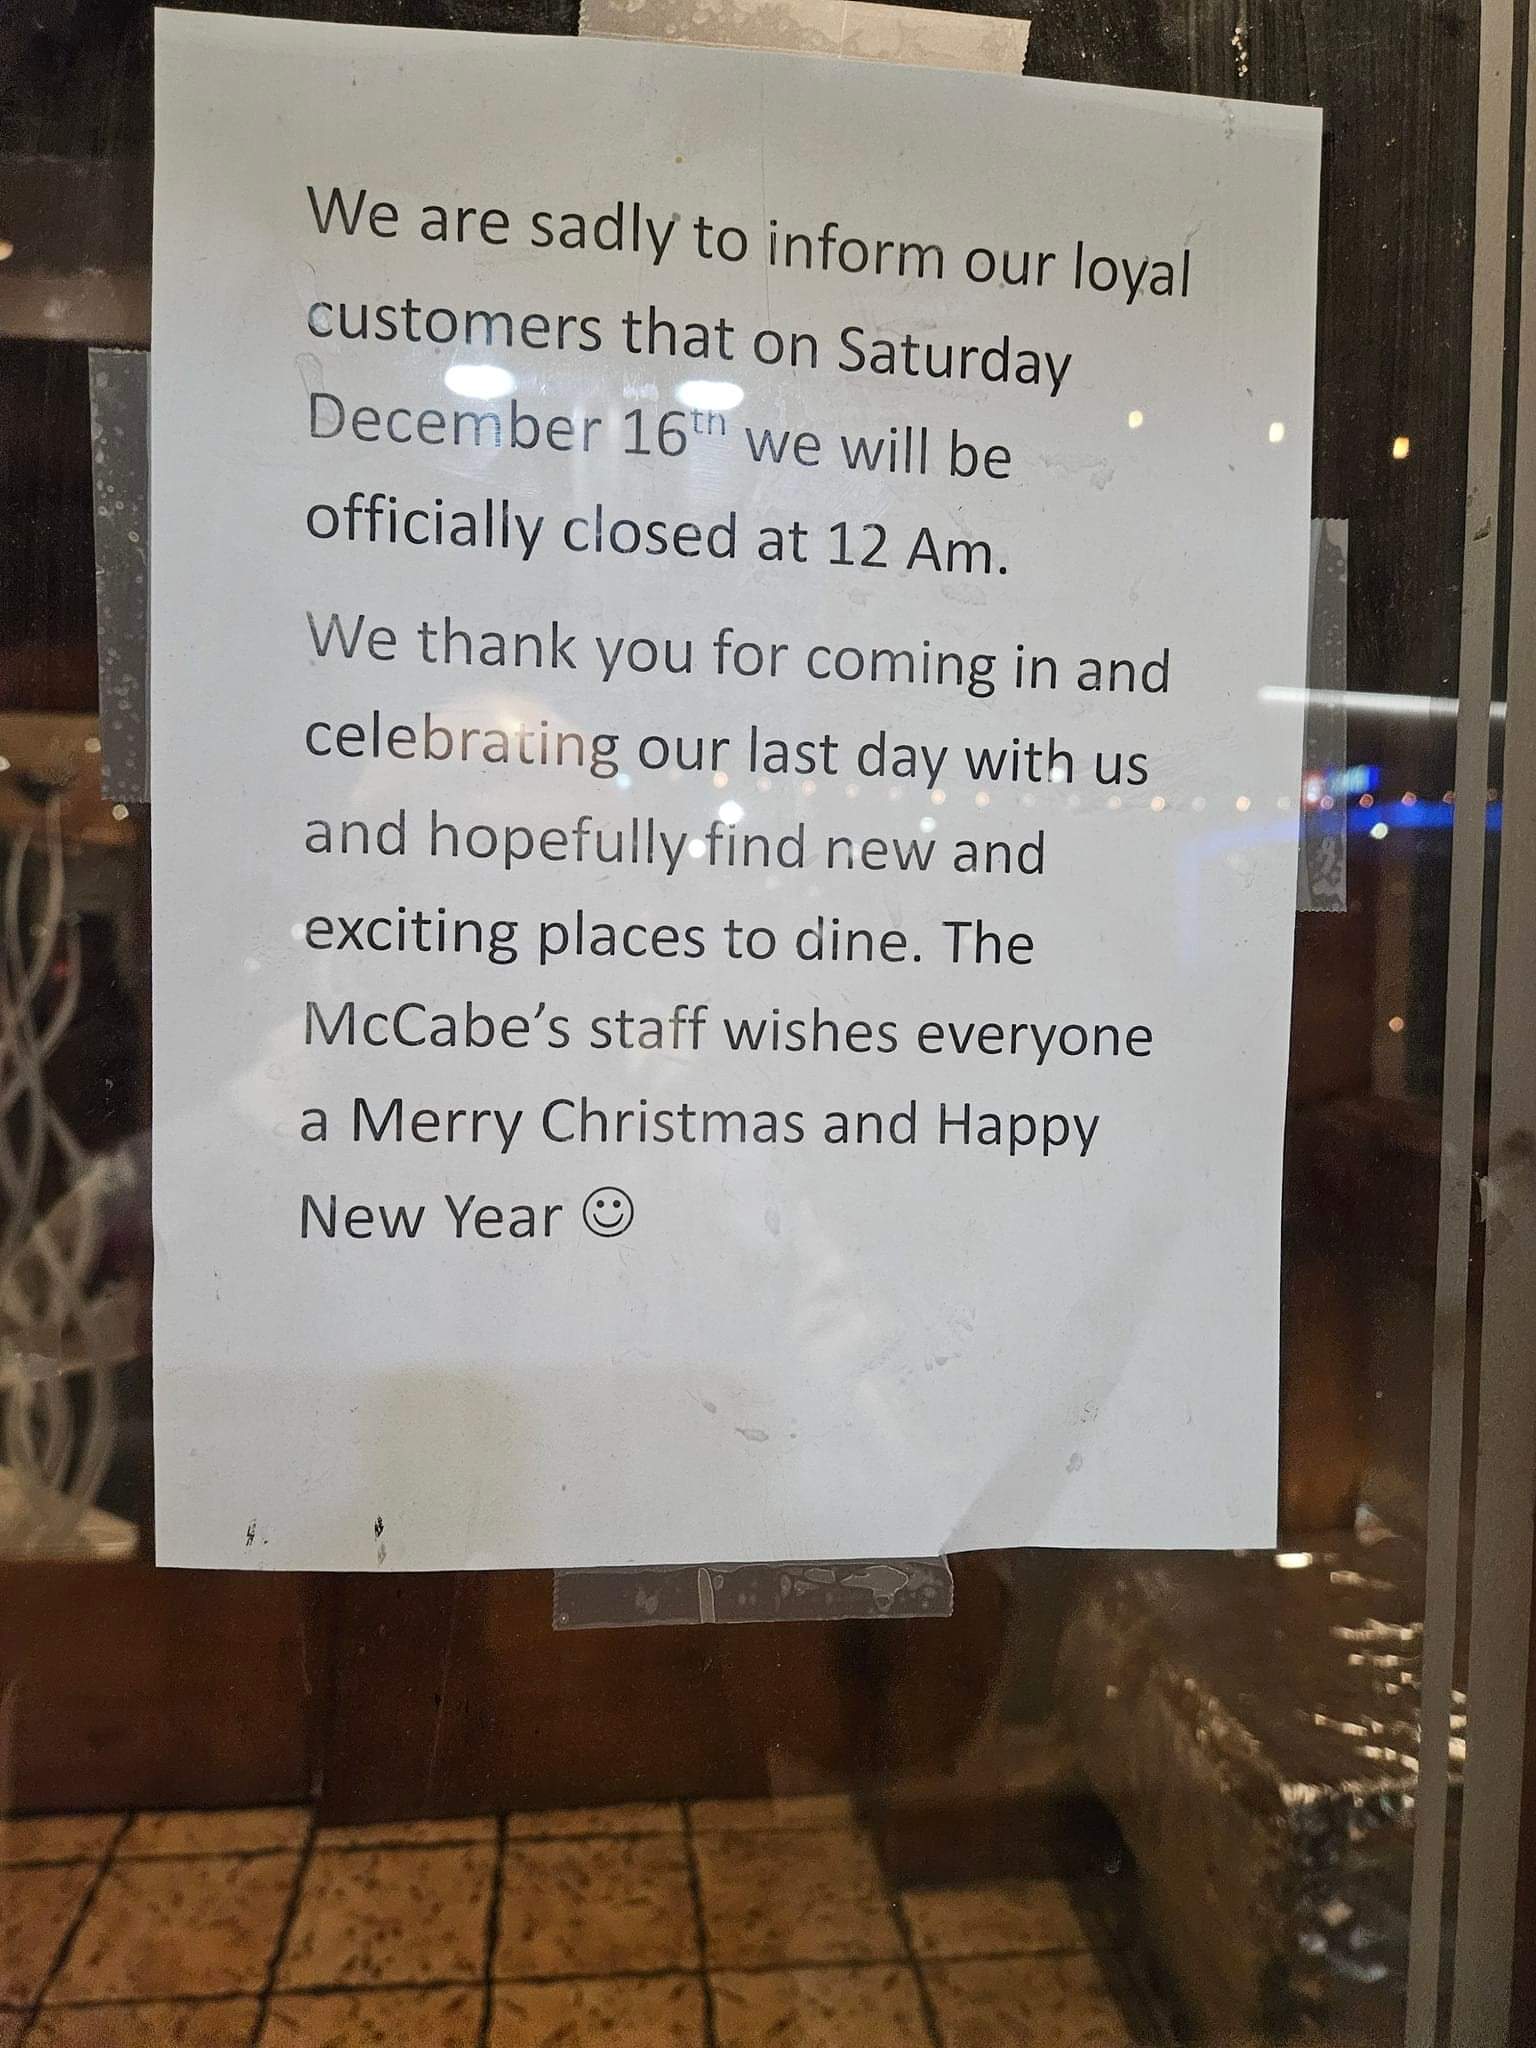 Sign indicating that McCabes is closing